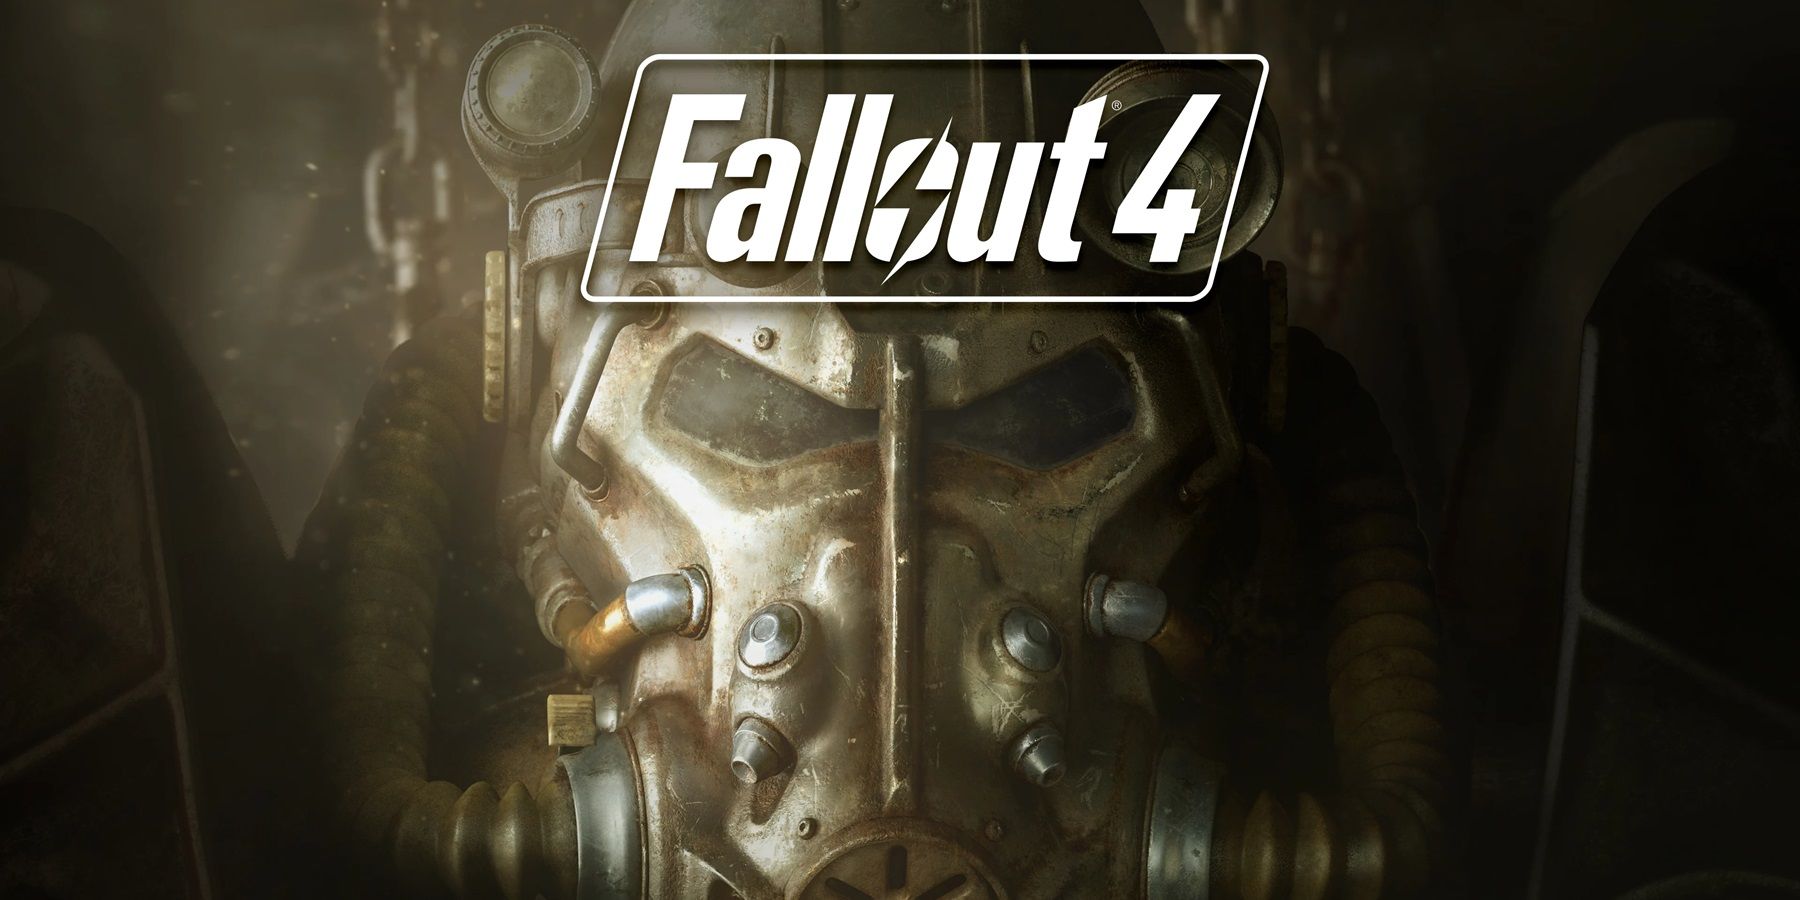 Huge Fallout 4 Update Coming on April 25